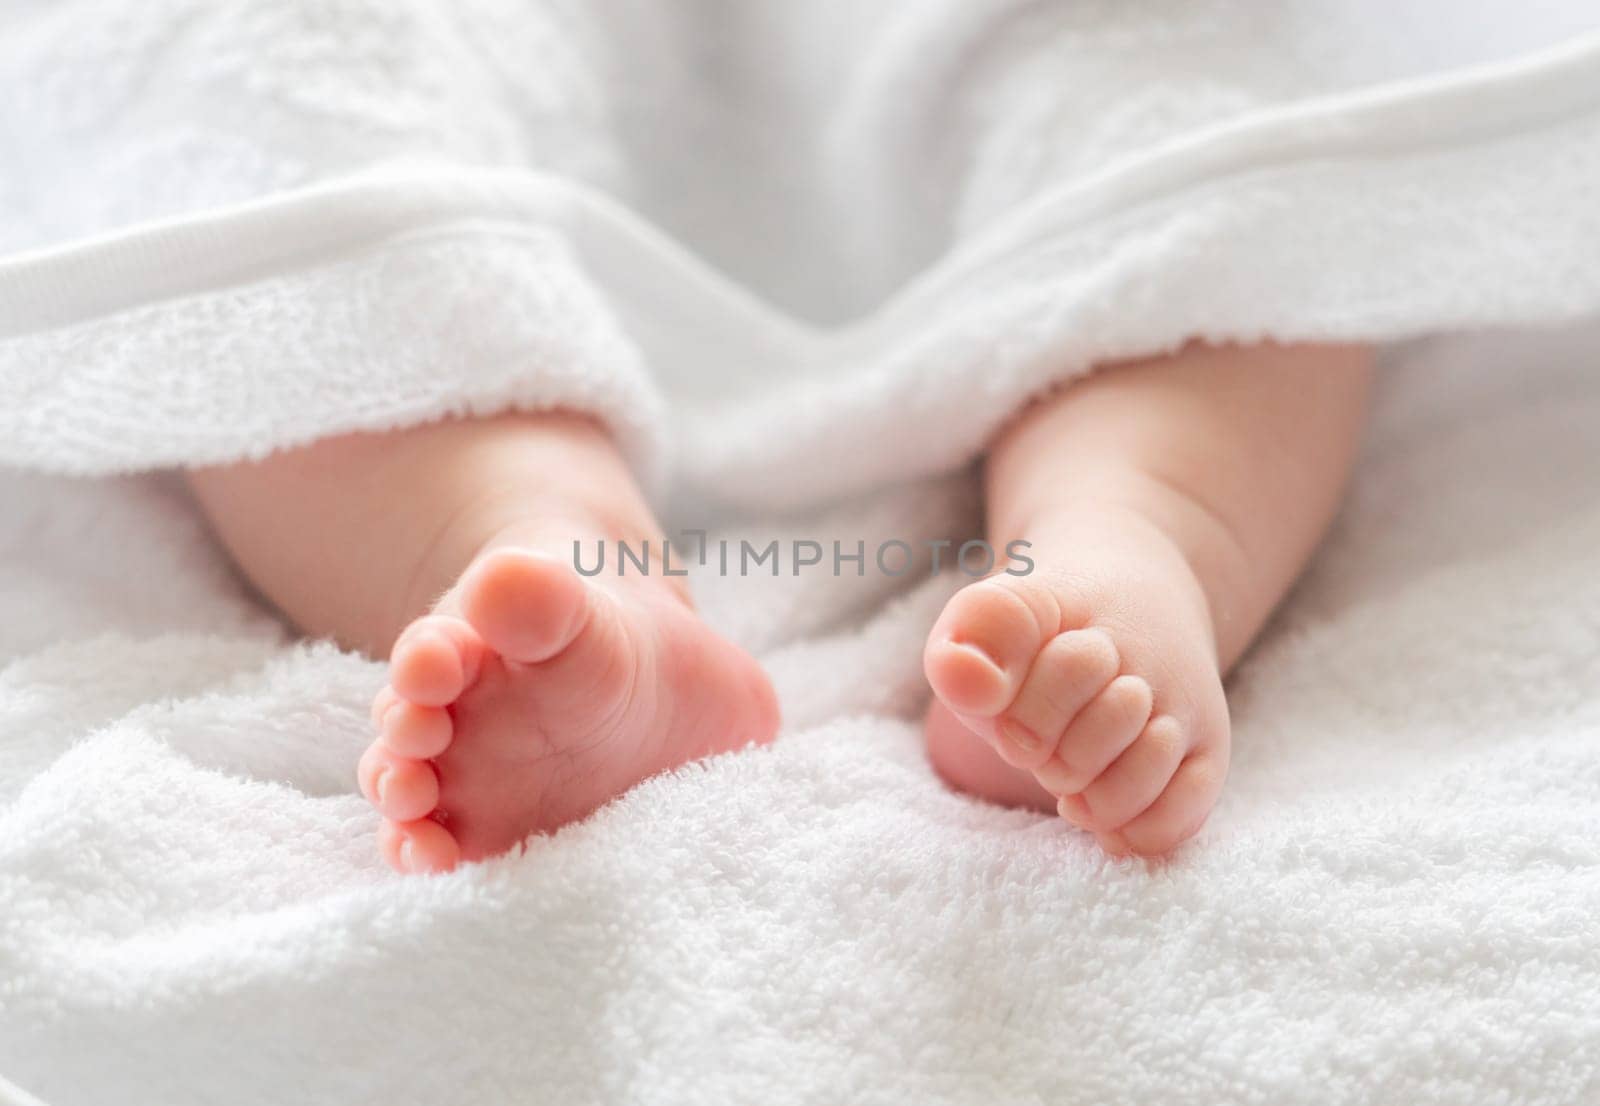 After a comforting bath, an infant child's feet and legs subtly appear from beneath the gentle protection of a white towel